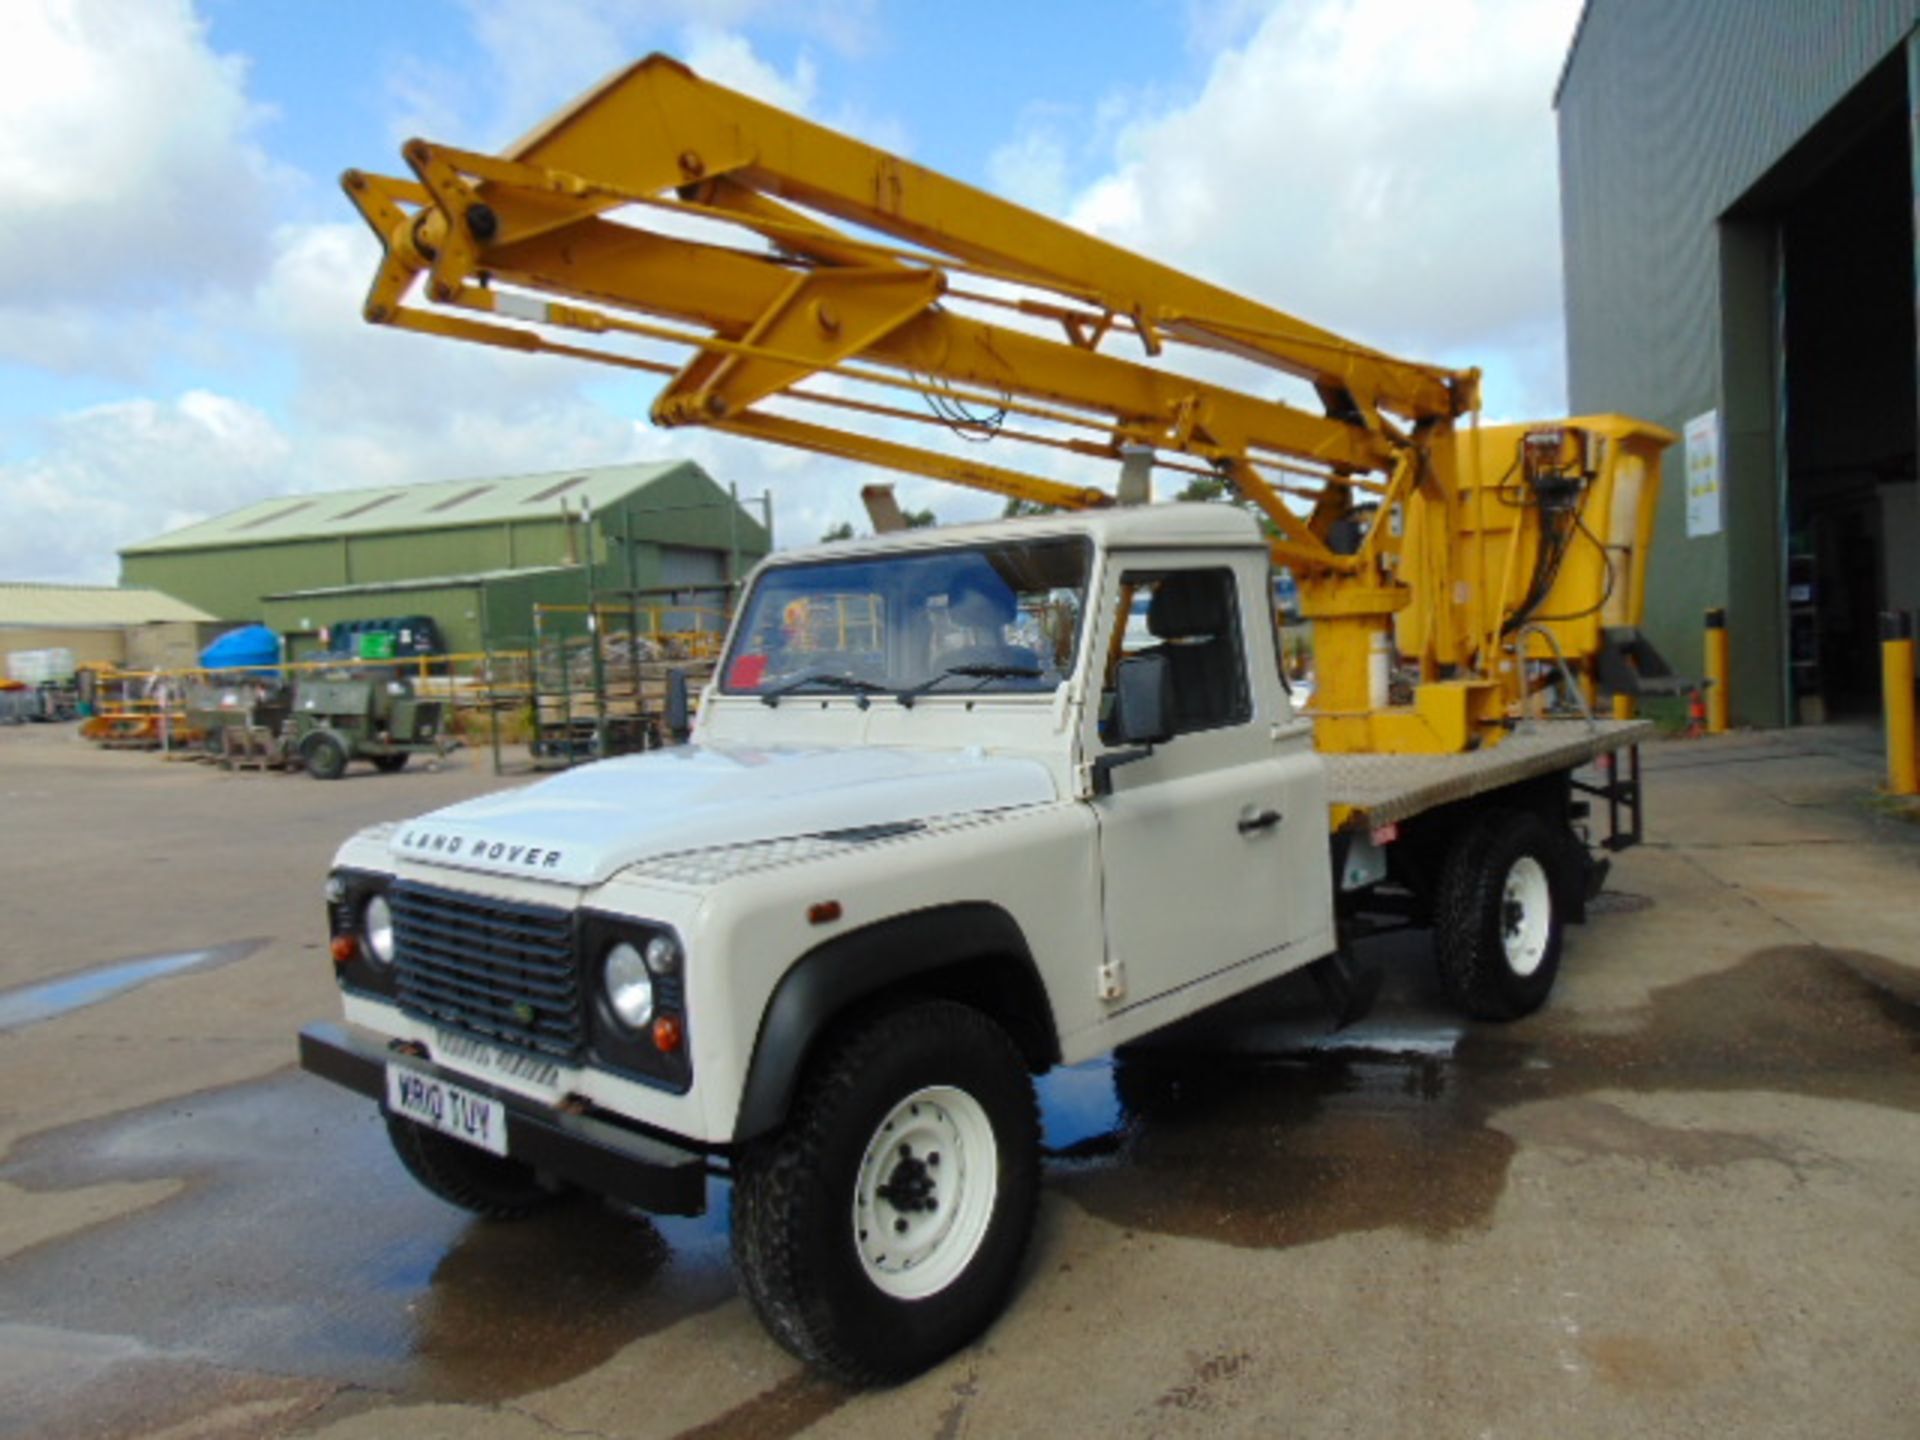 2010 Land Rover Defender 130 2.4 Puma Cherry Picker / Access Lift ONLY 83,760 MILES! - Image 6 of 32